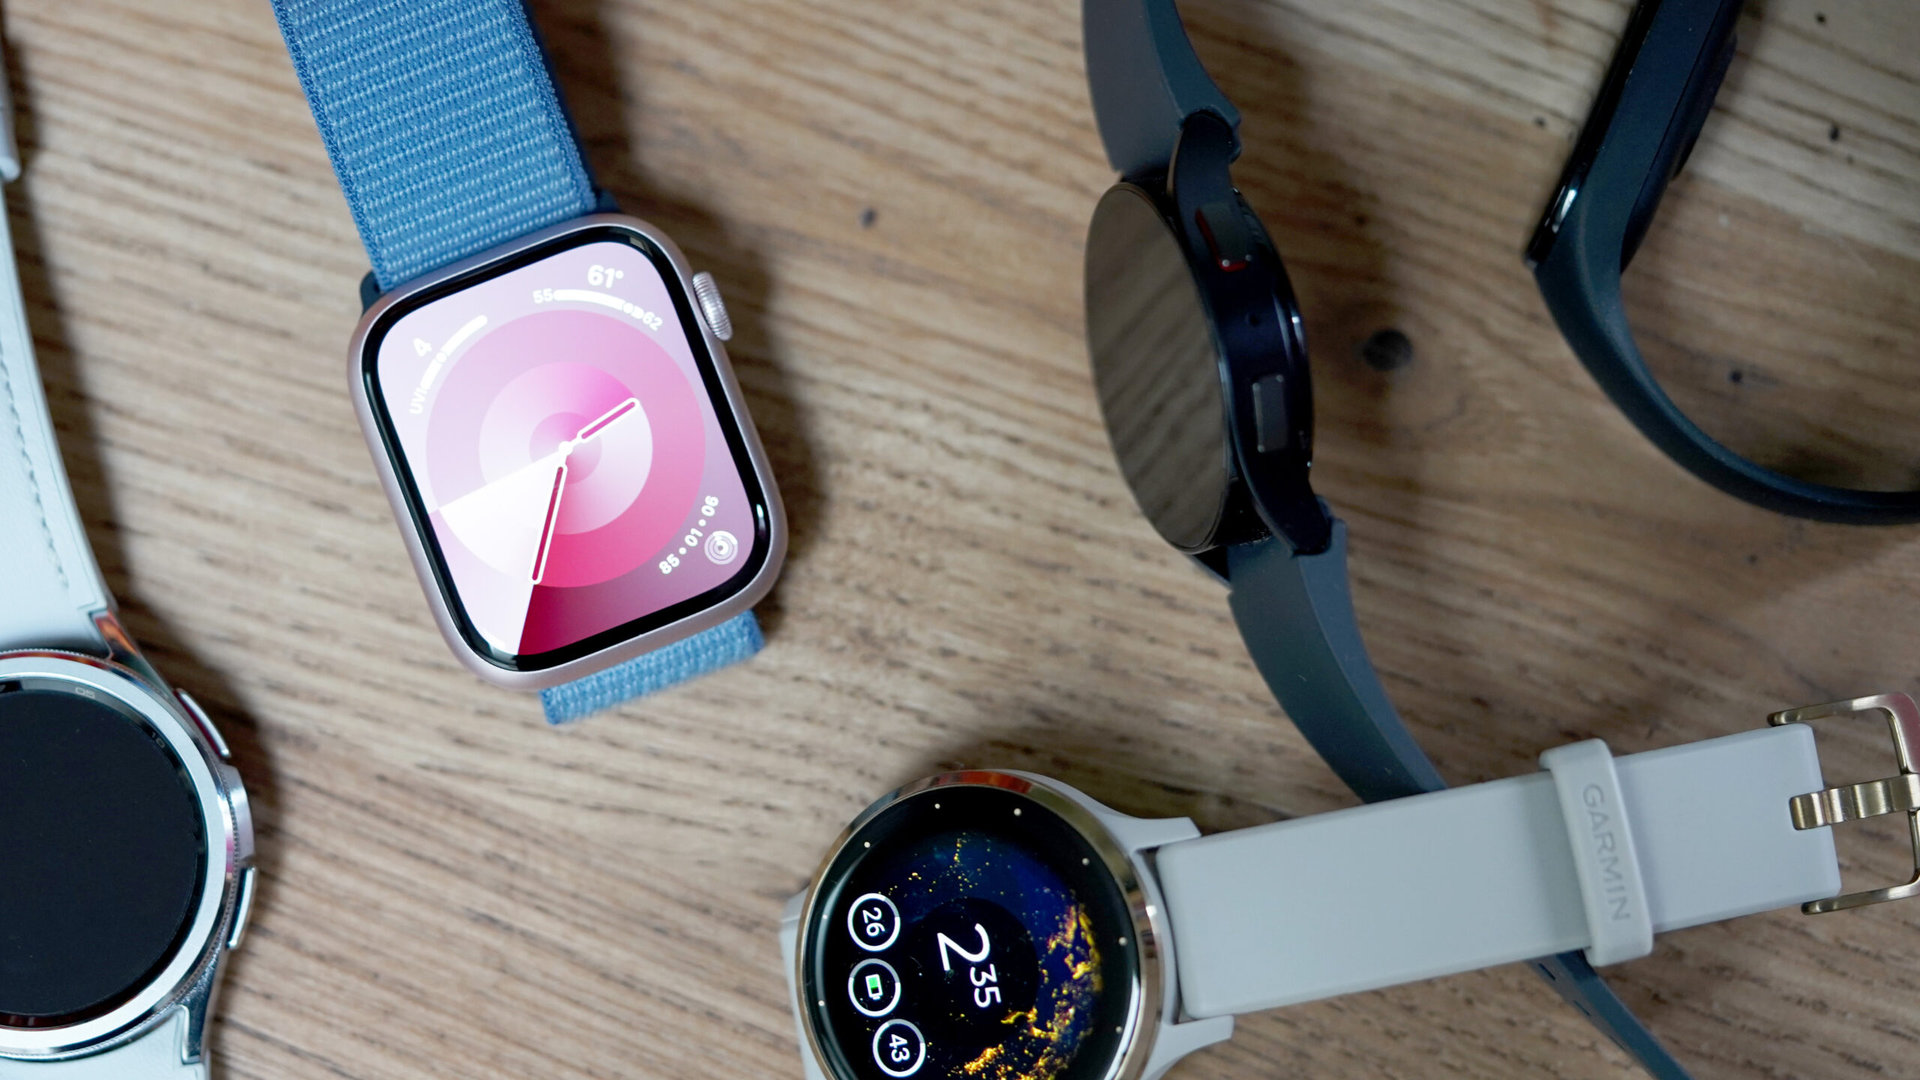 A variety of wearables rest on a wooden surface, representing the best smartwatches and trackers for women.